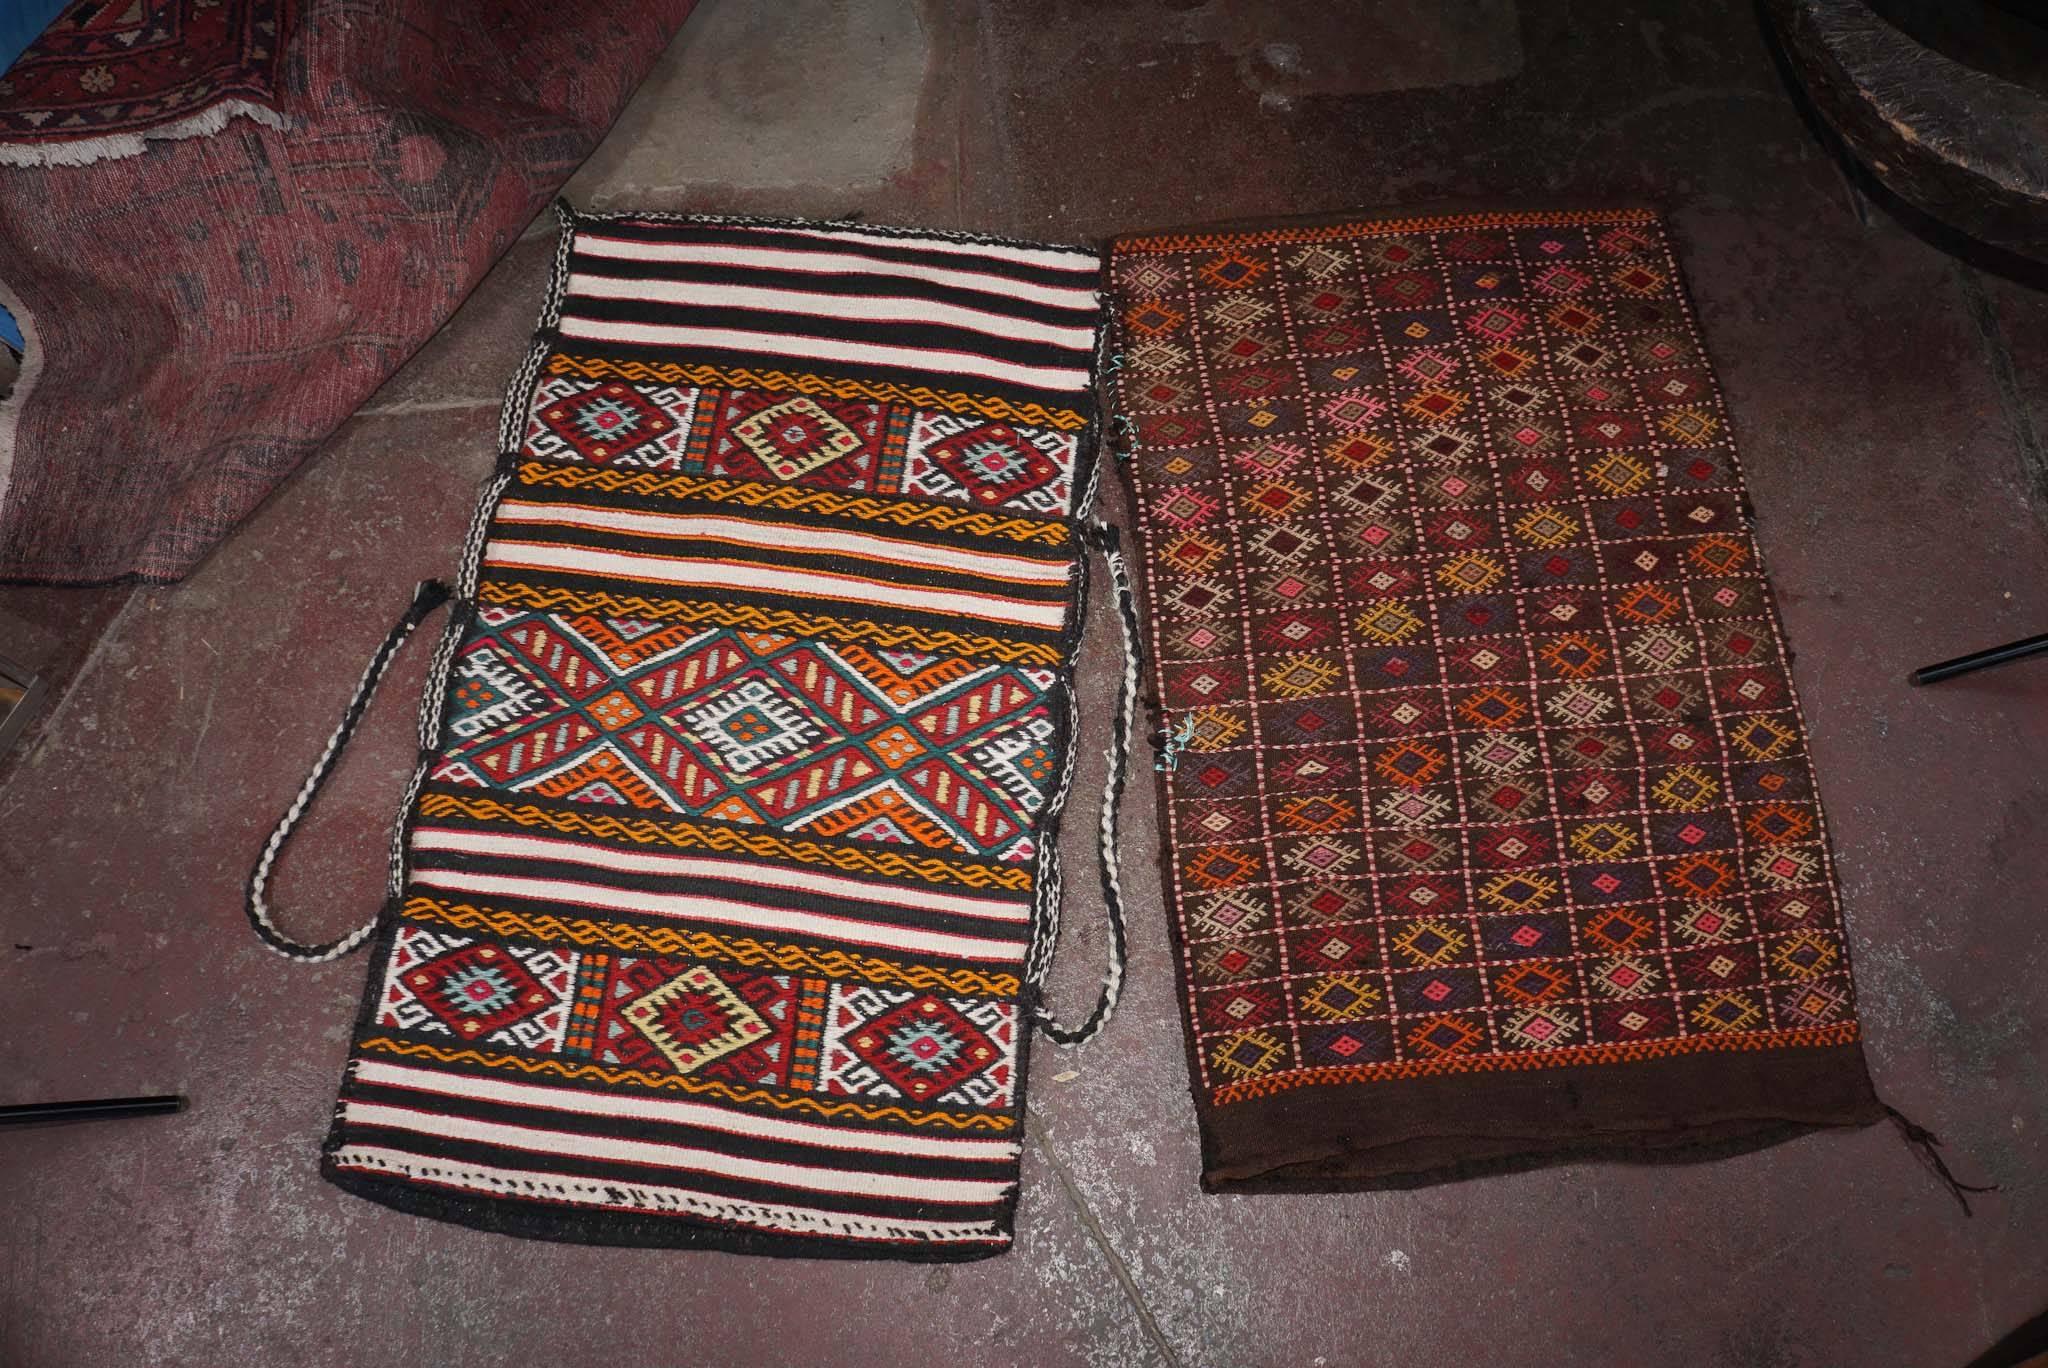 Turkish grain bags (100 percent wool), handmade in contemporaneously in Istanbul but in a very old, traditional style. Wide array of colors and patterns available. Wonderful as floor seating when filled with pillows, or to reupholster other items,